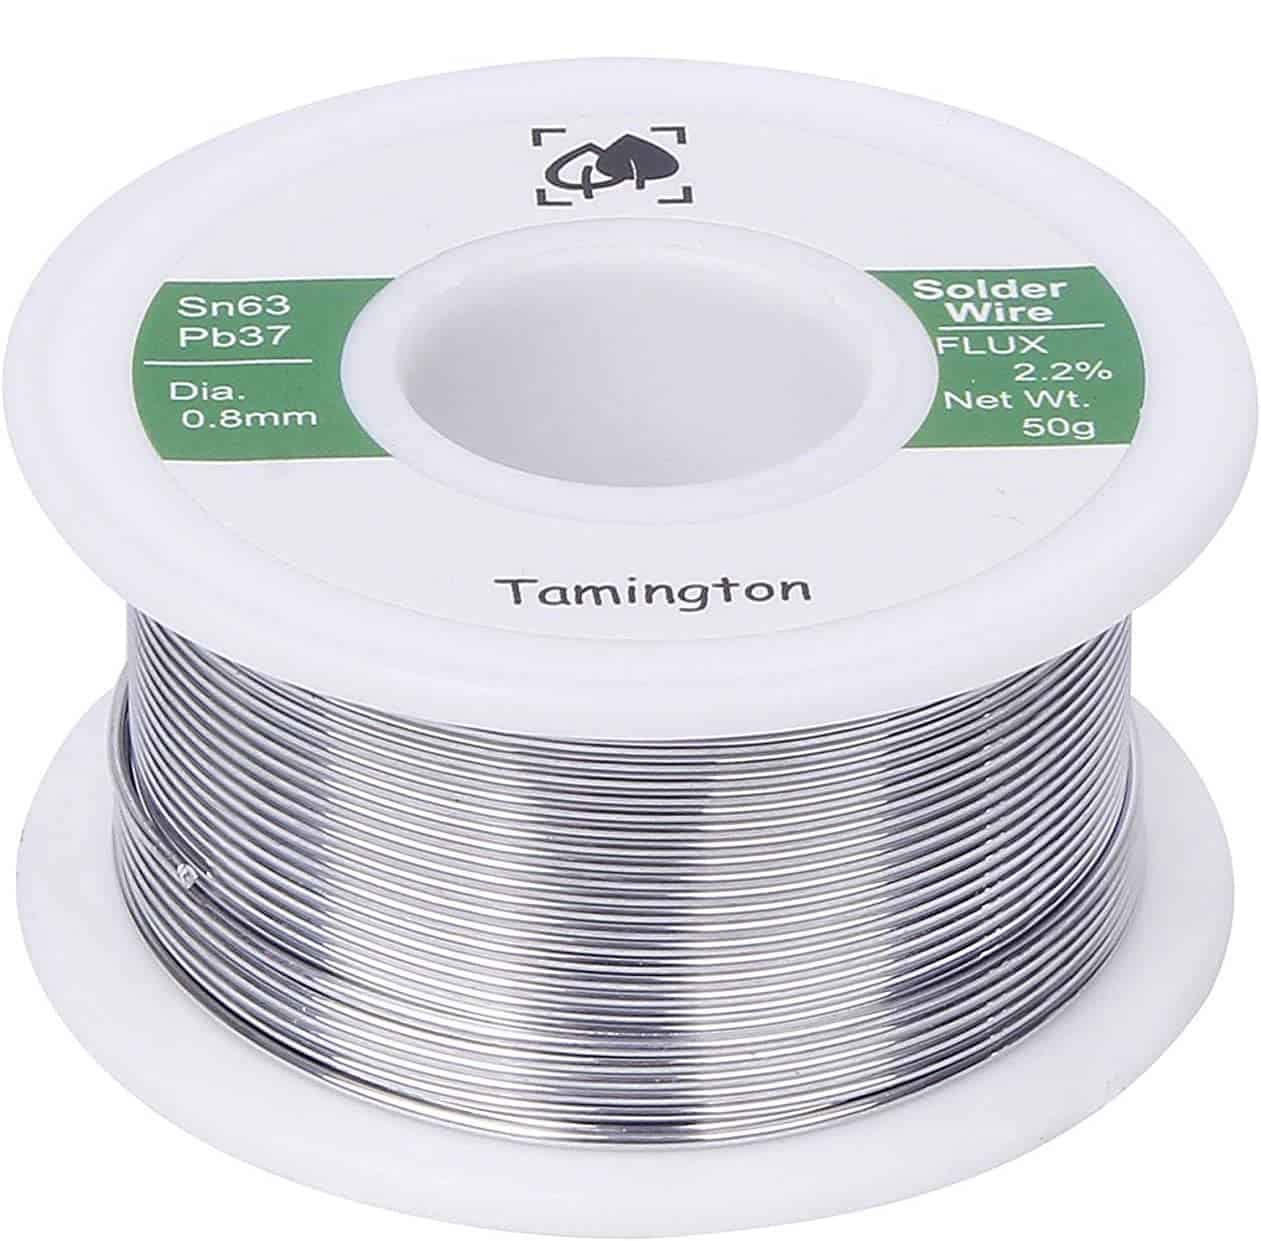 Best soldering wire with low melting point- Tamington Soldering wire Sn63 Pb37 with Rosin Core